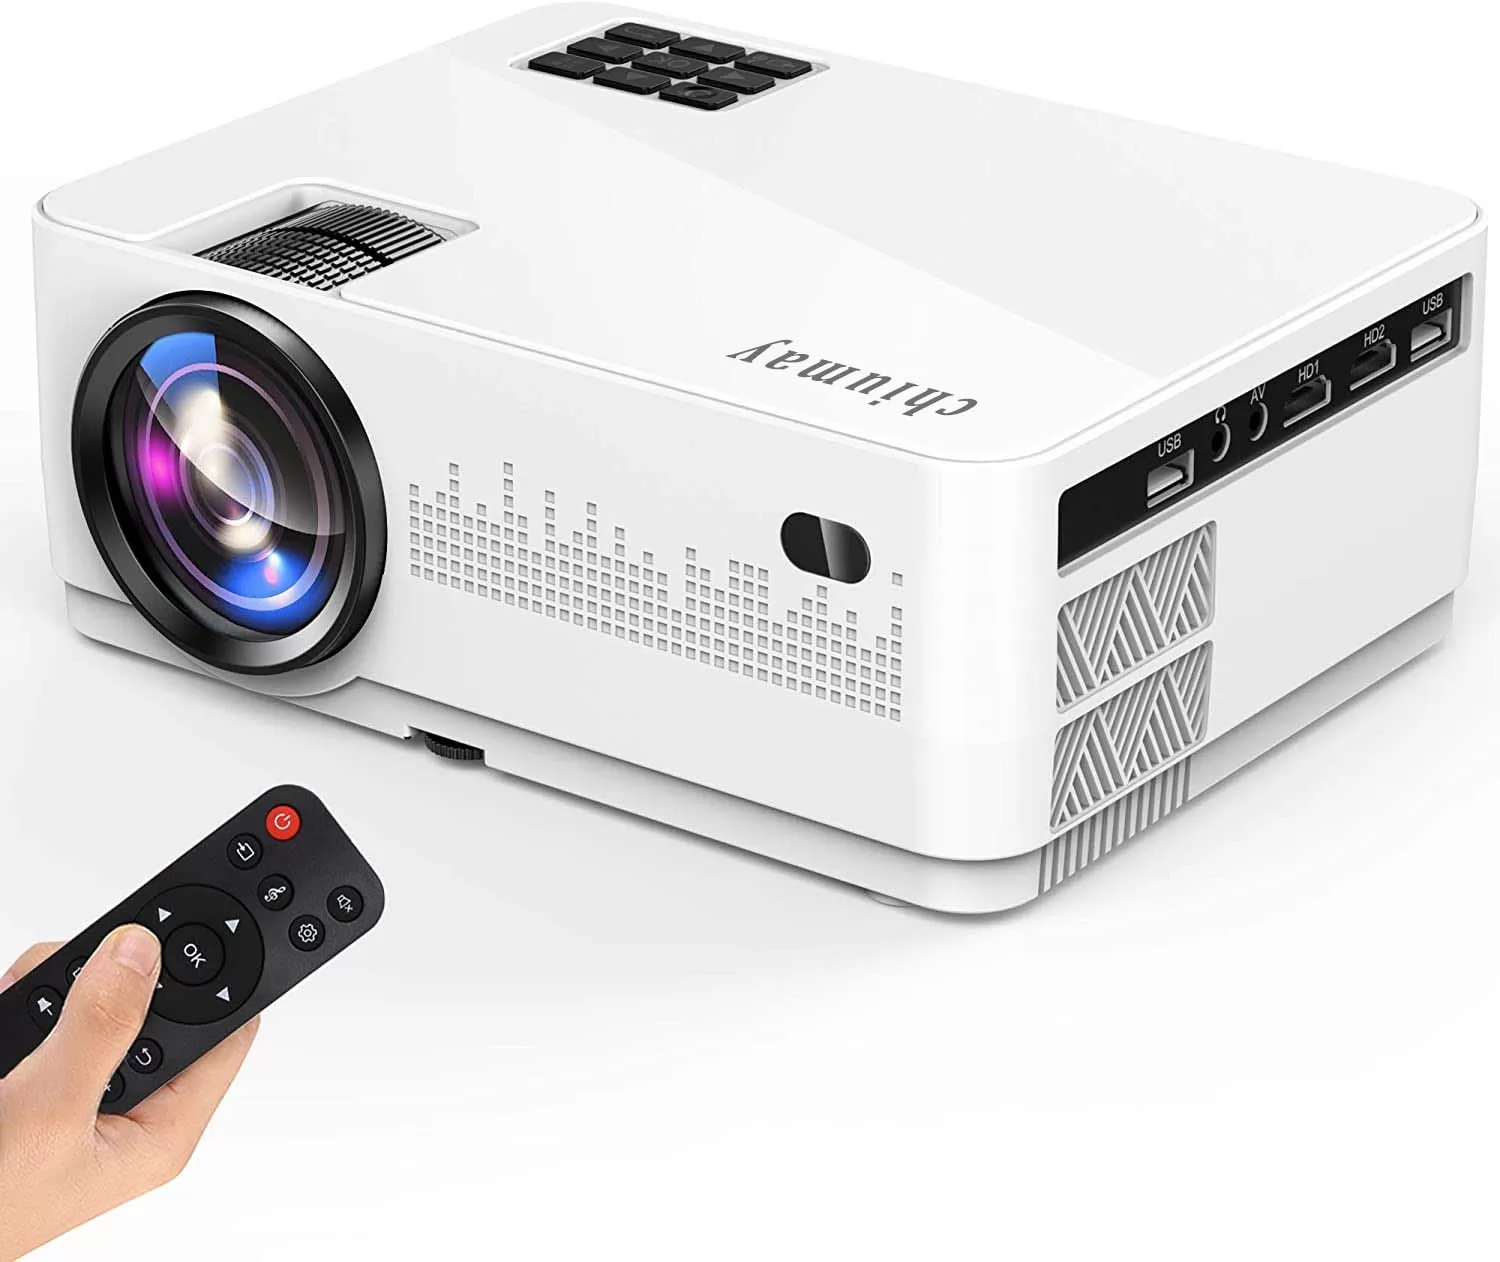 chiumay Mini Projector, 5000Lux Movie Projector, 1080P and 200" Screen Supported L21 Video Projector, with 2xHDMI/2xUSB Ports, Compatible with TV etc.